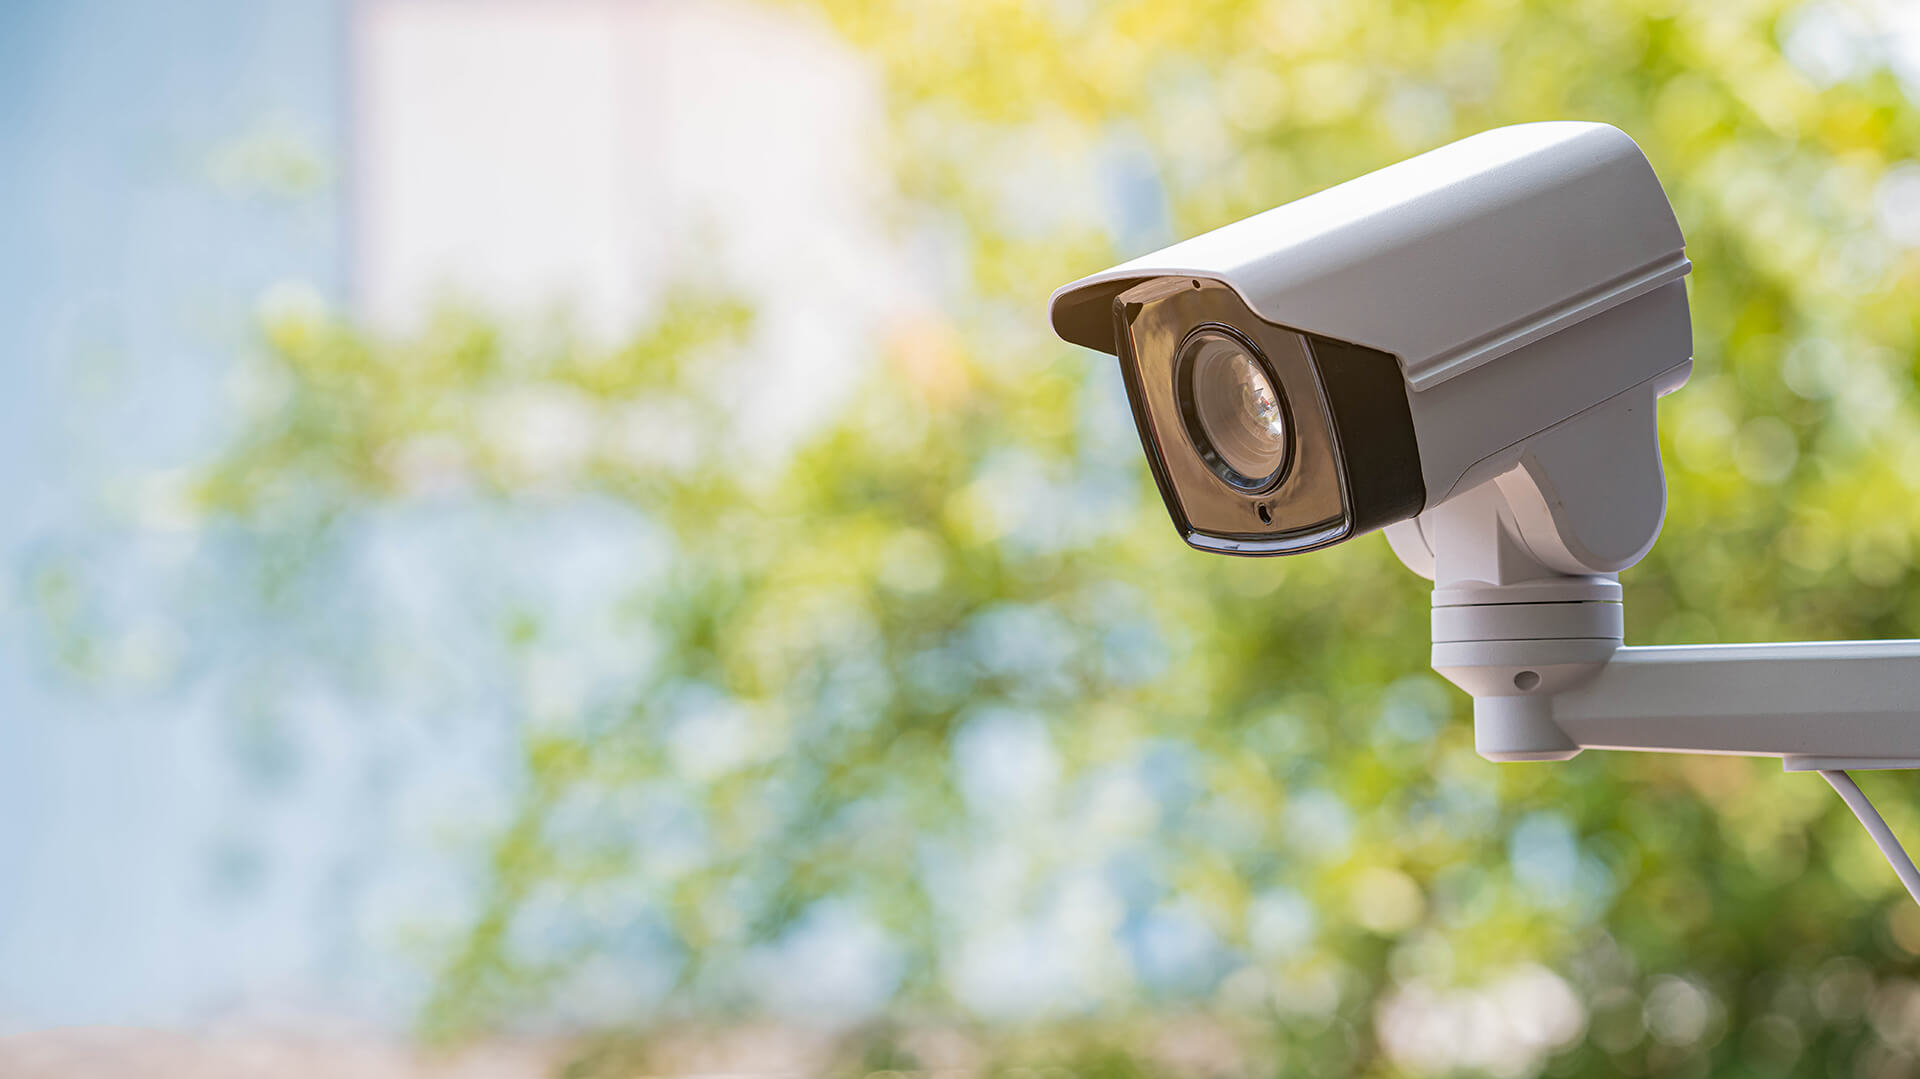 An IP bullet type security camera, one of the various types of security cameras, mounted outdoors against a lush green background, showcasing its suitability for outdoor surveillance.